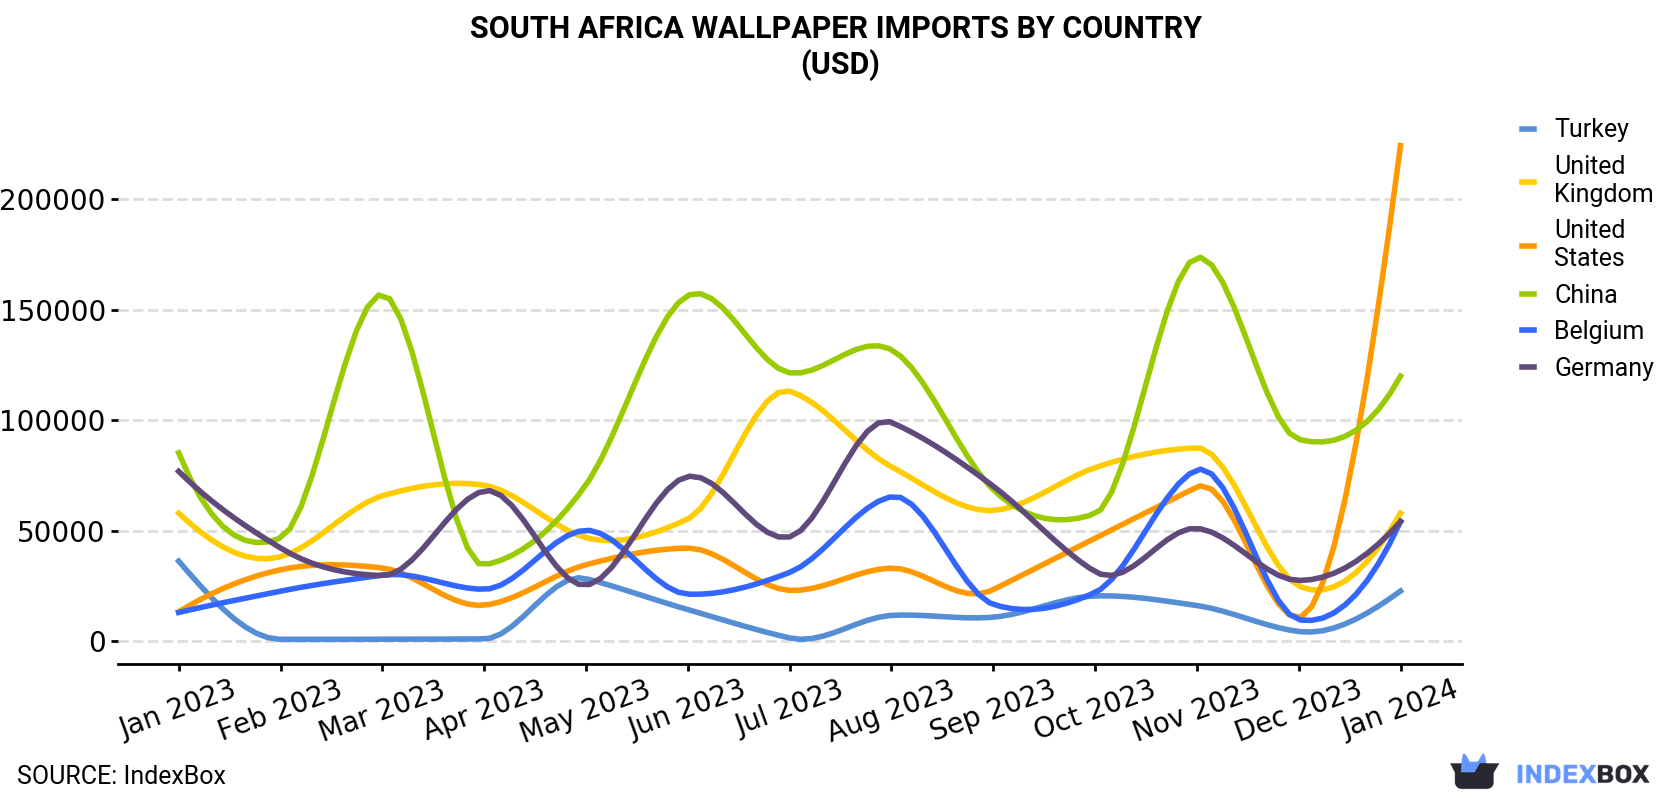 South Africa Wallpaper Imports By Country (USD)